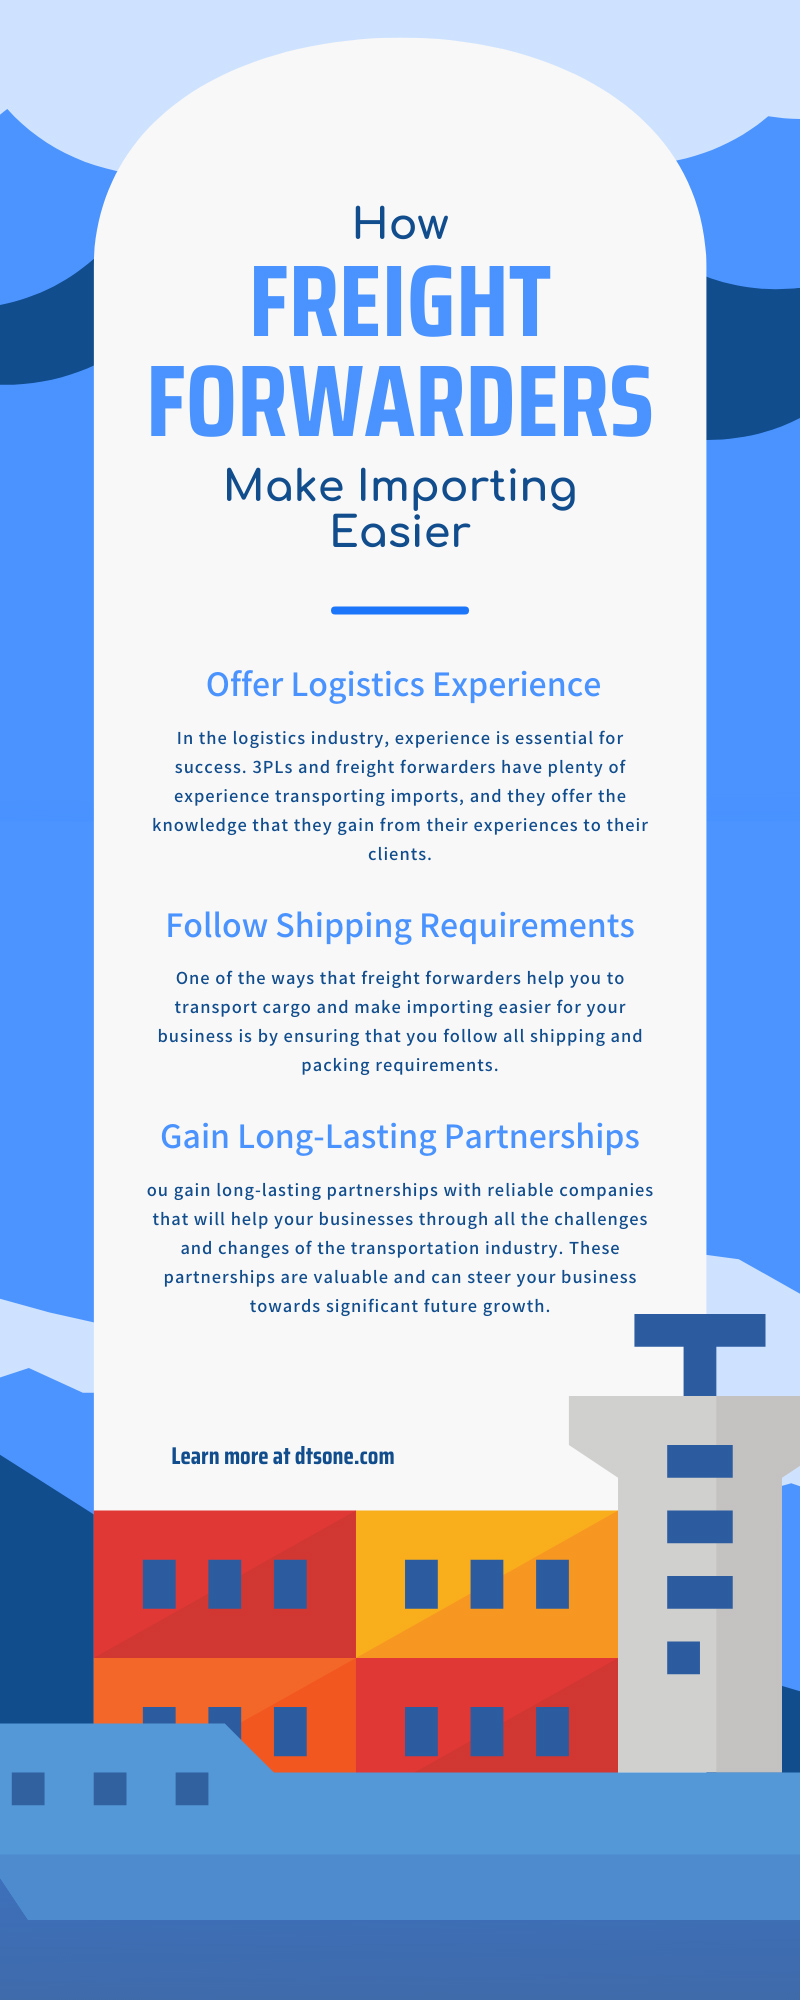 How Freight Forwarders Make Importing Easier